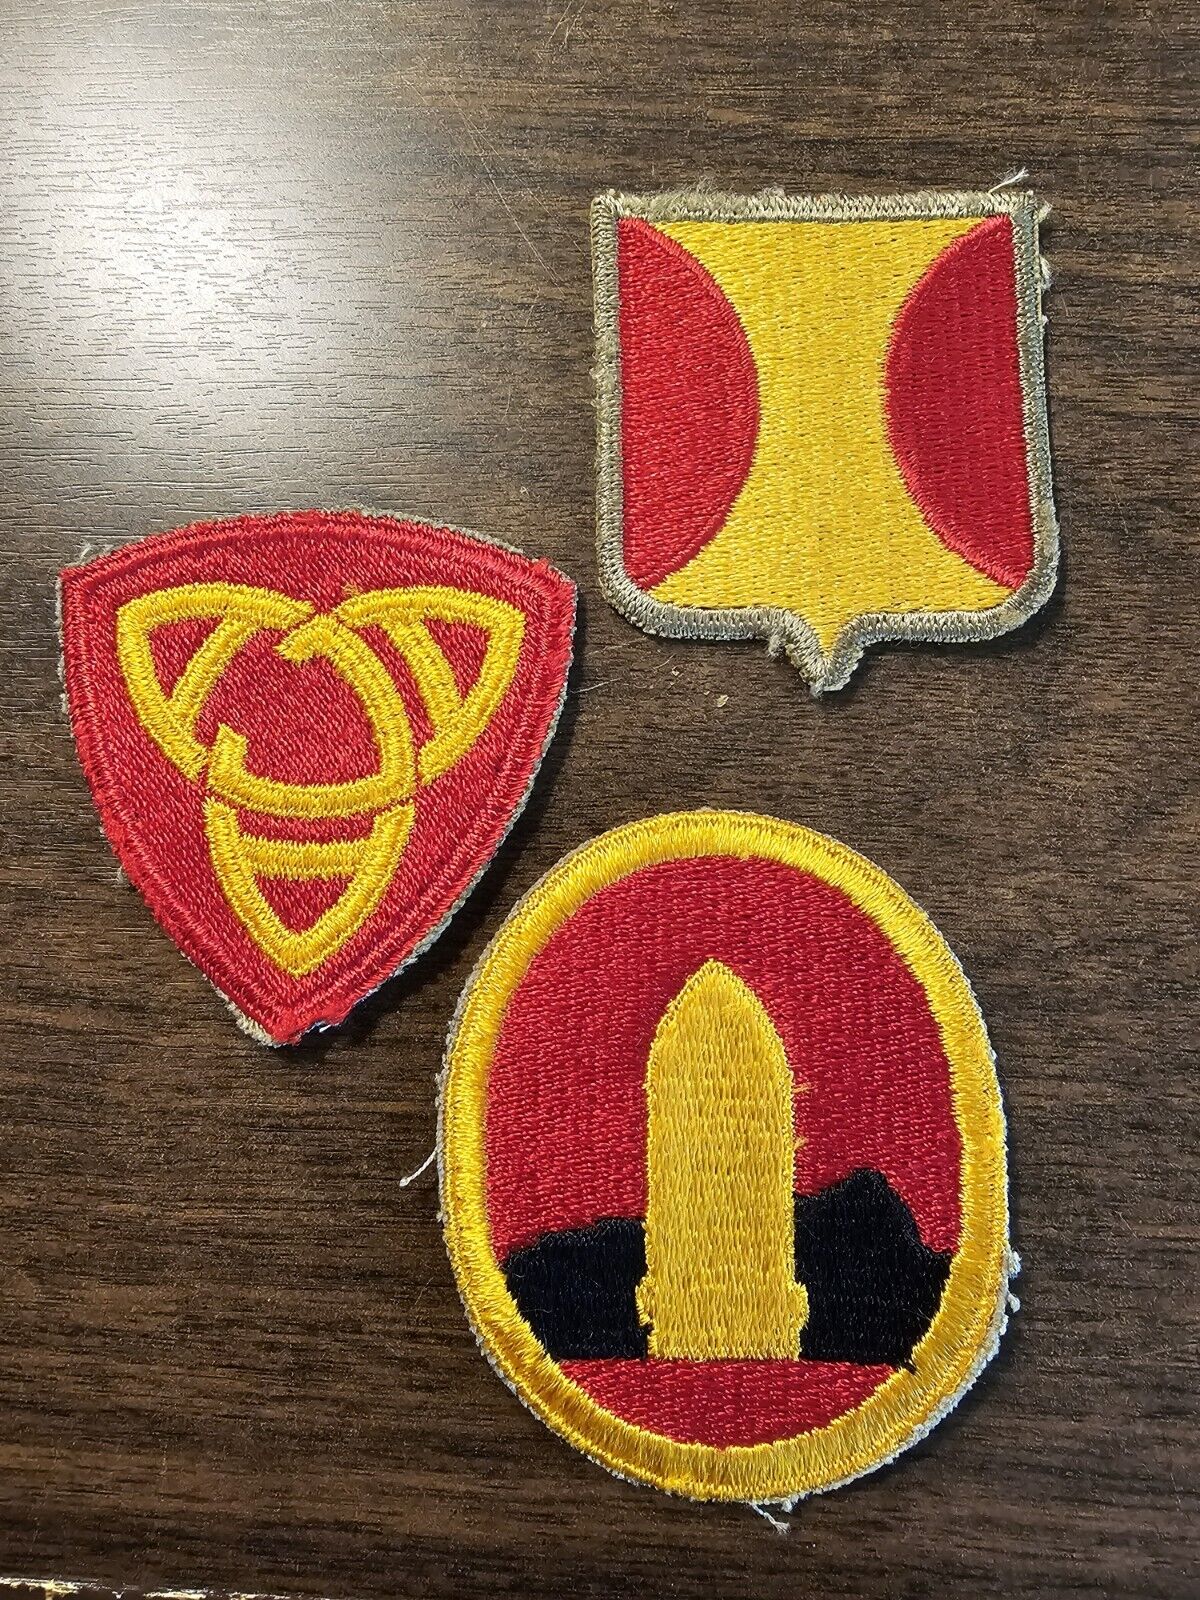 WWII 1960s US Army Vietnam Cold War Era Division Commamd Patch Lot L@@K 1B